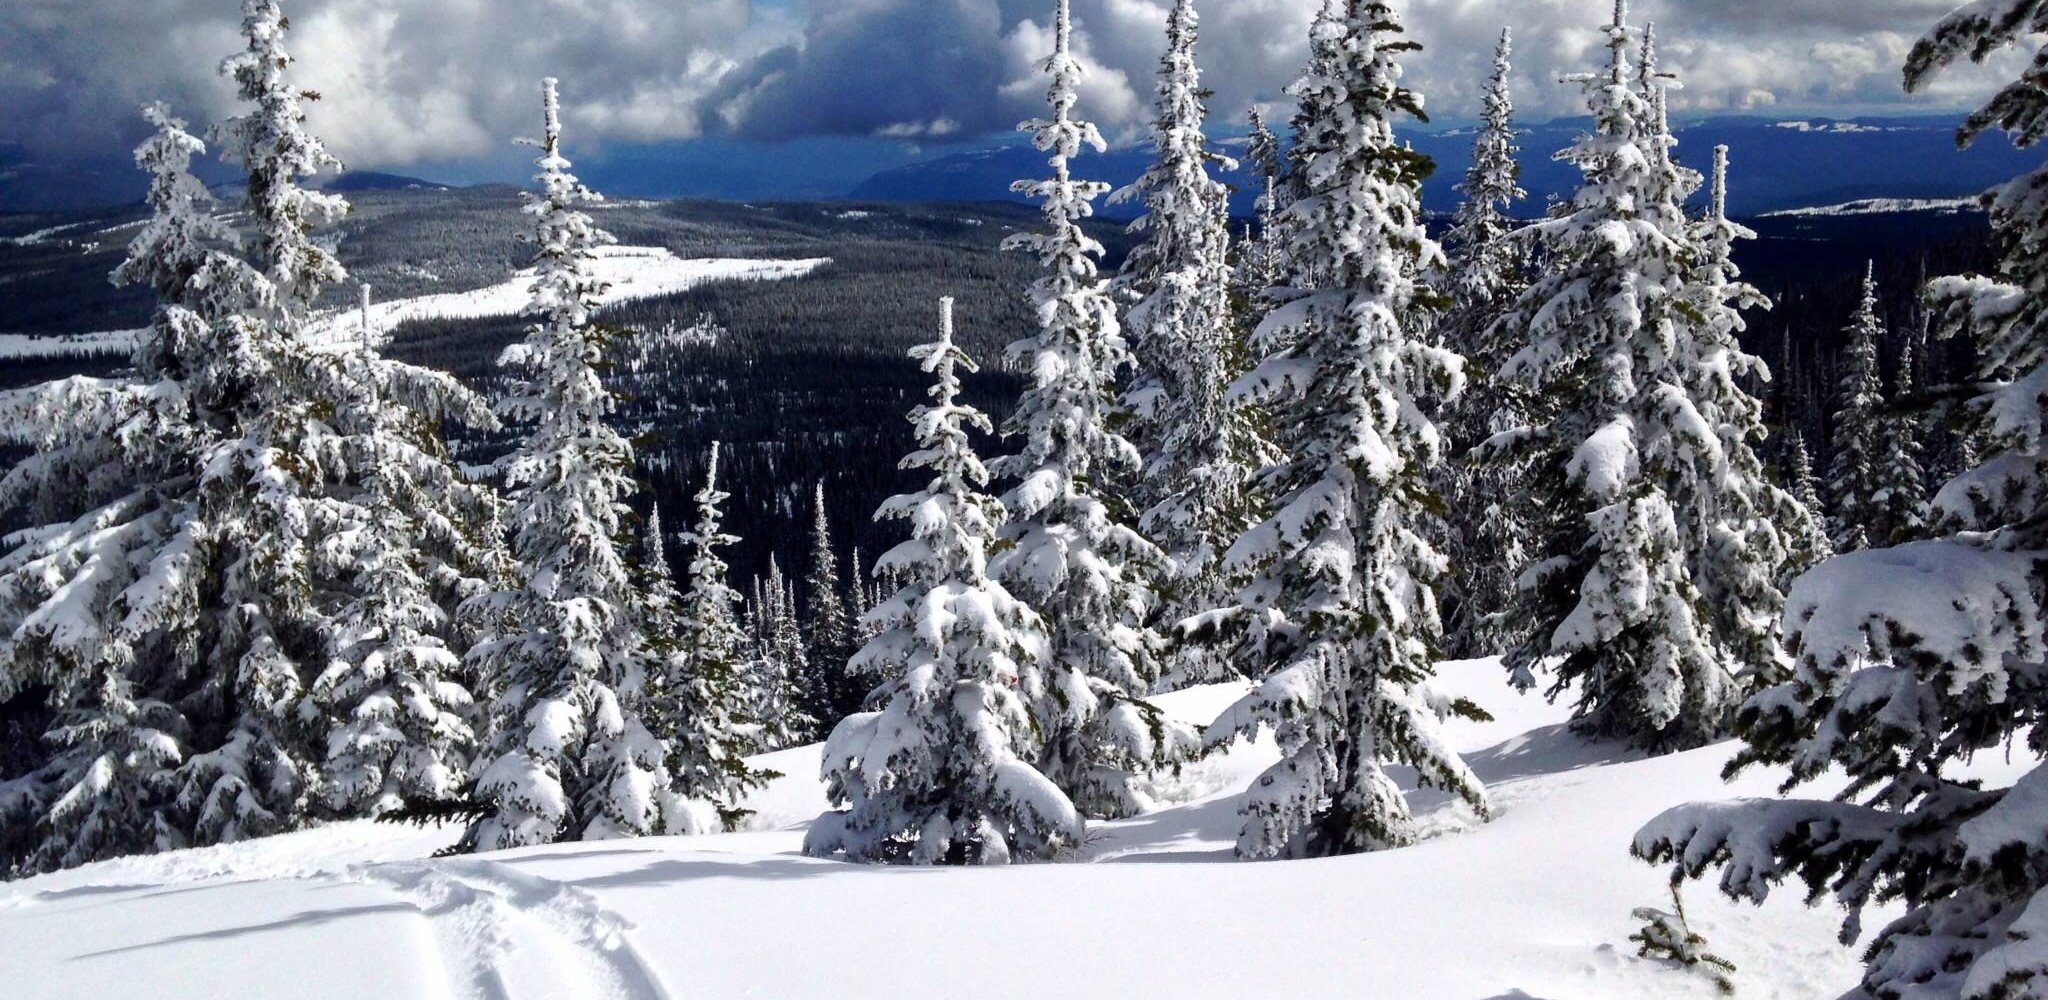 5 Things to Do in the Okanagan in the Winter